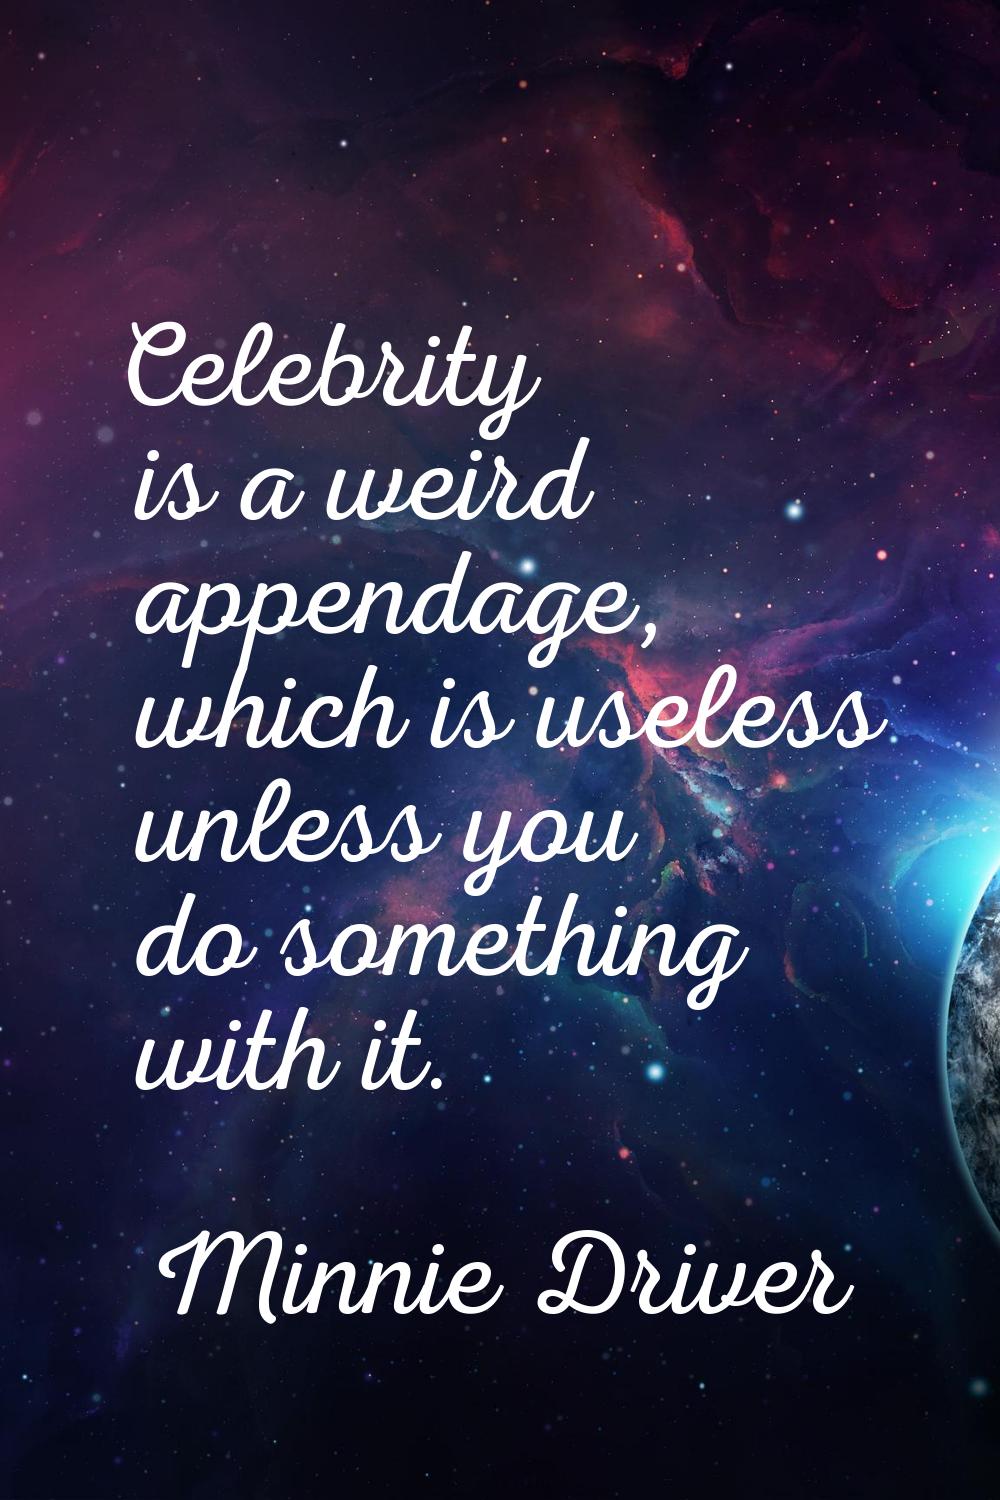 Celebrity is a weird appendage, which is useless unless you do something with it.